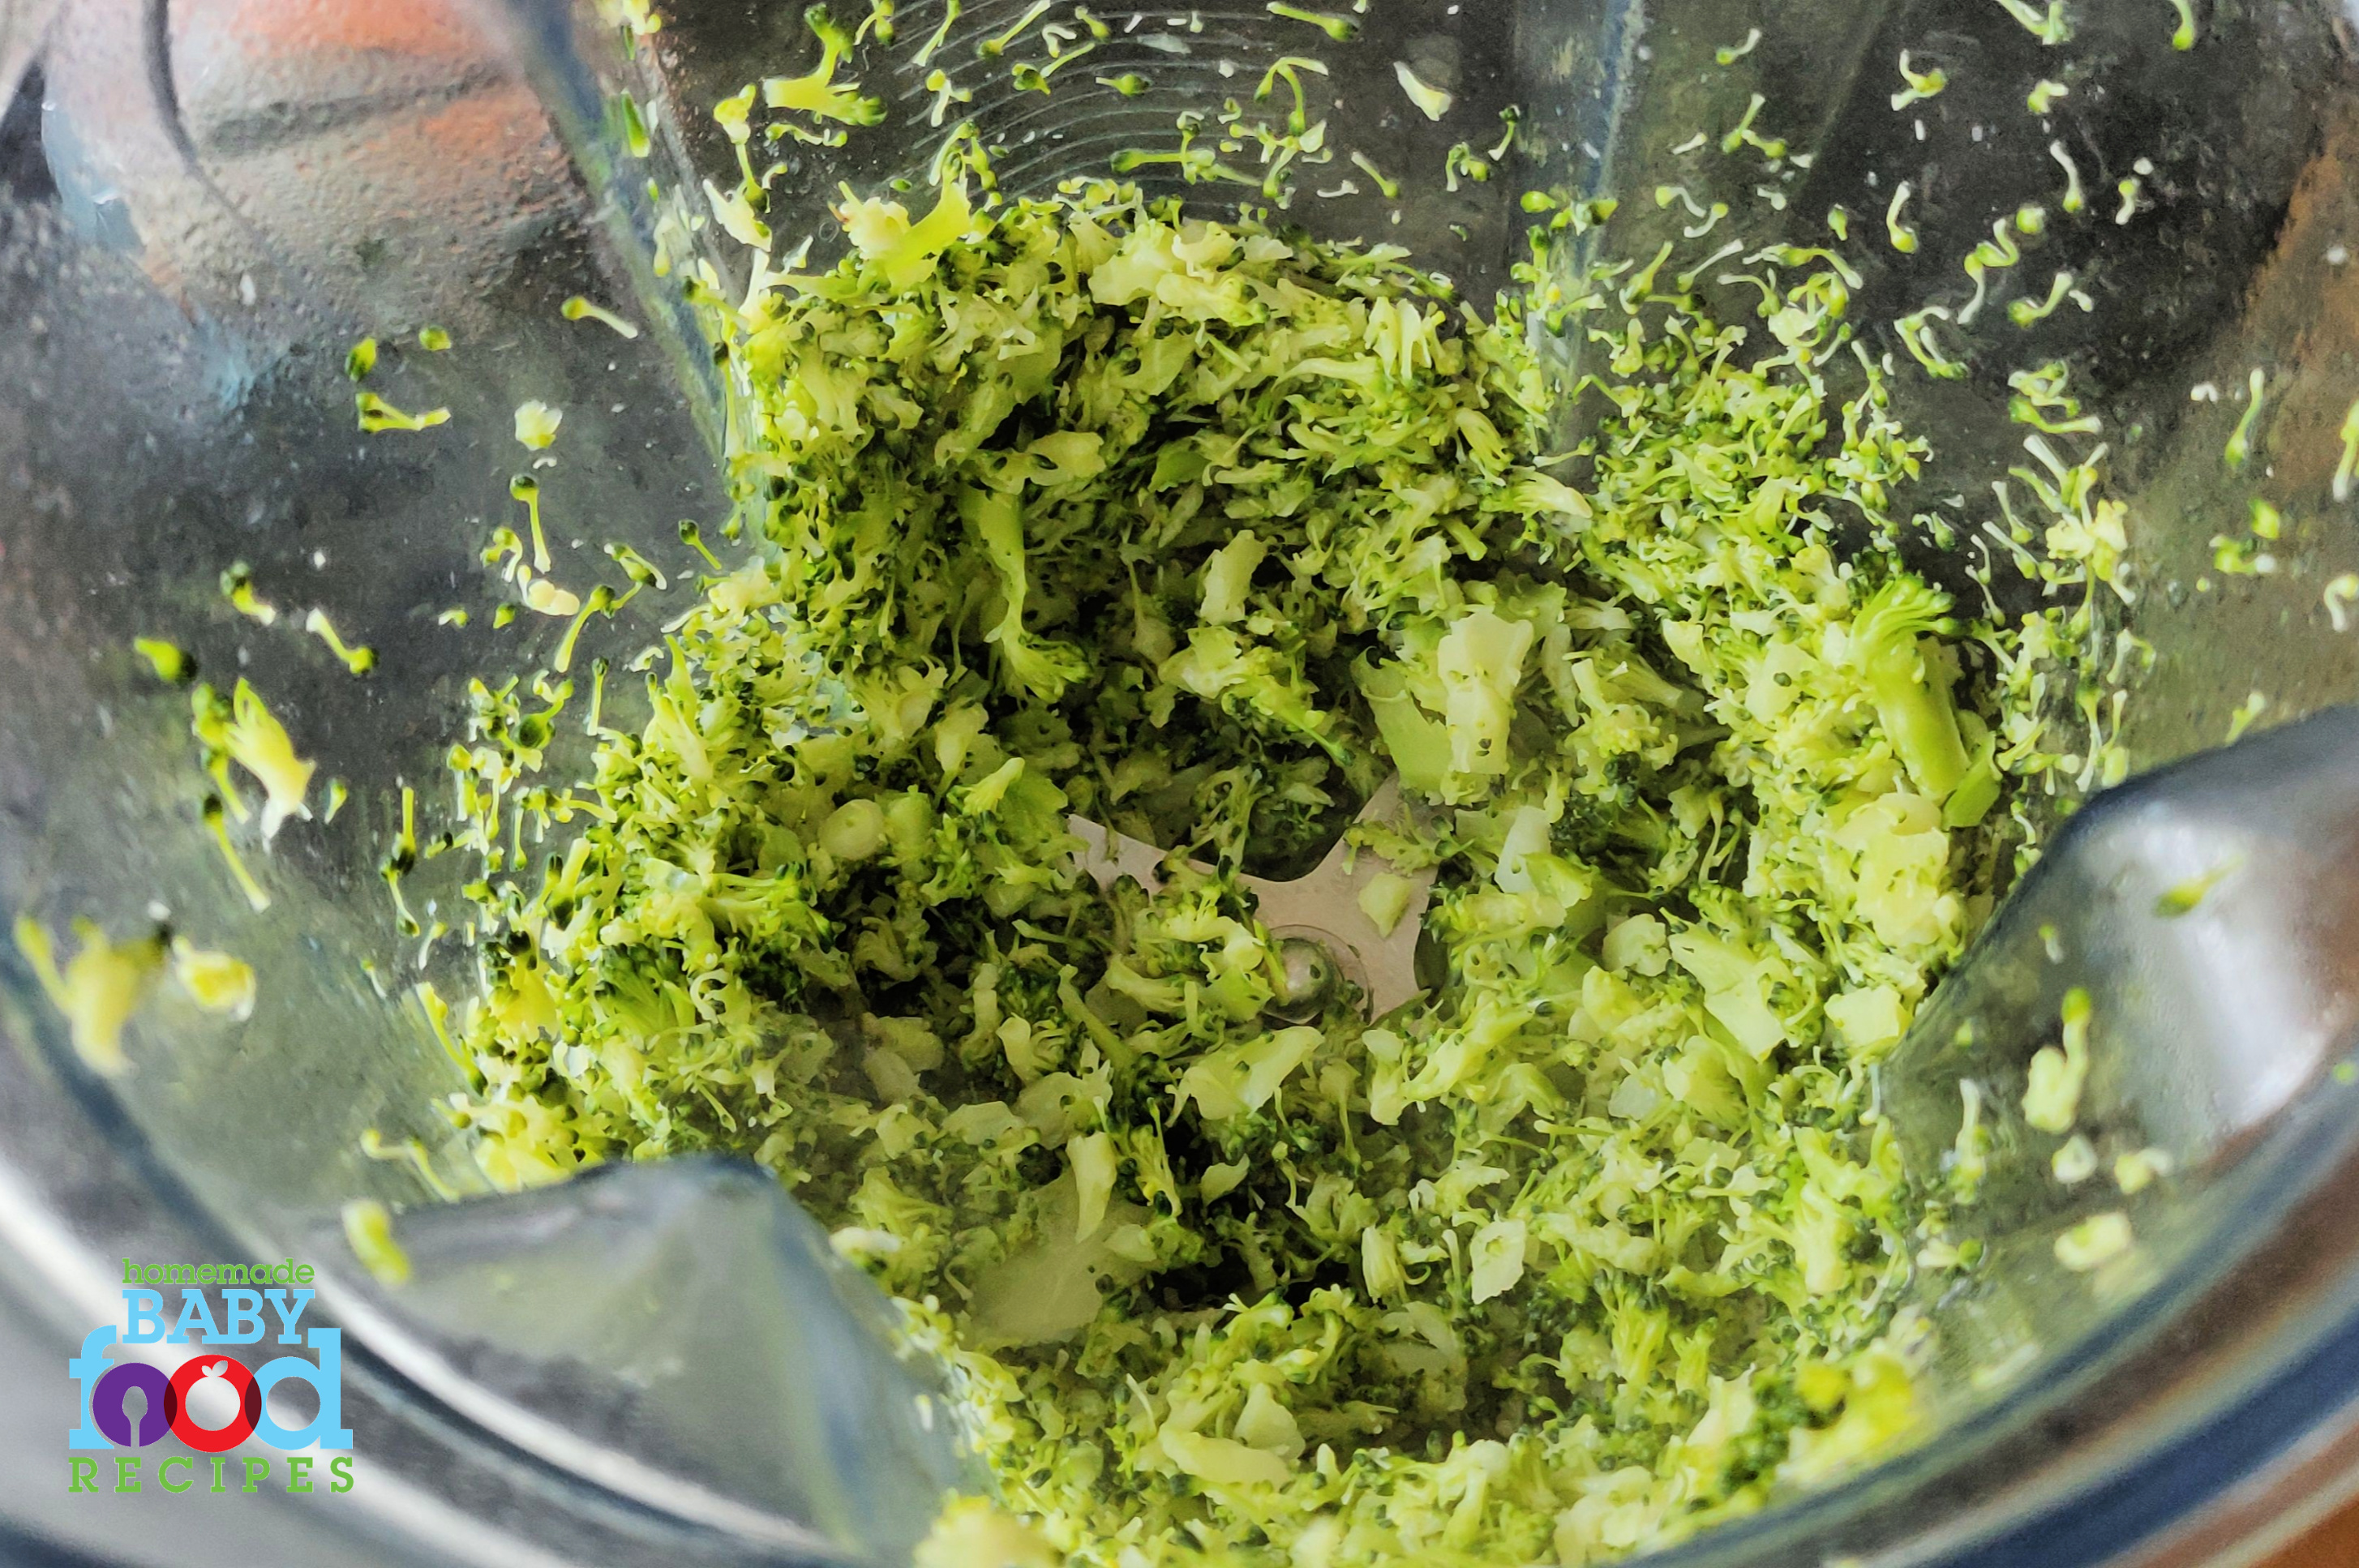 Broccoli pulsed in a blender is just the right texture for baby's broccoli nuggets